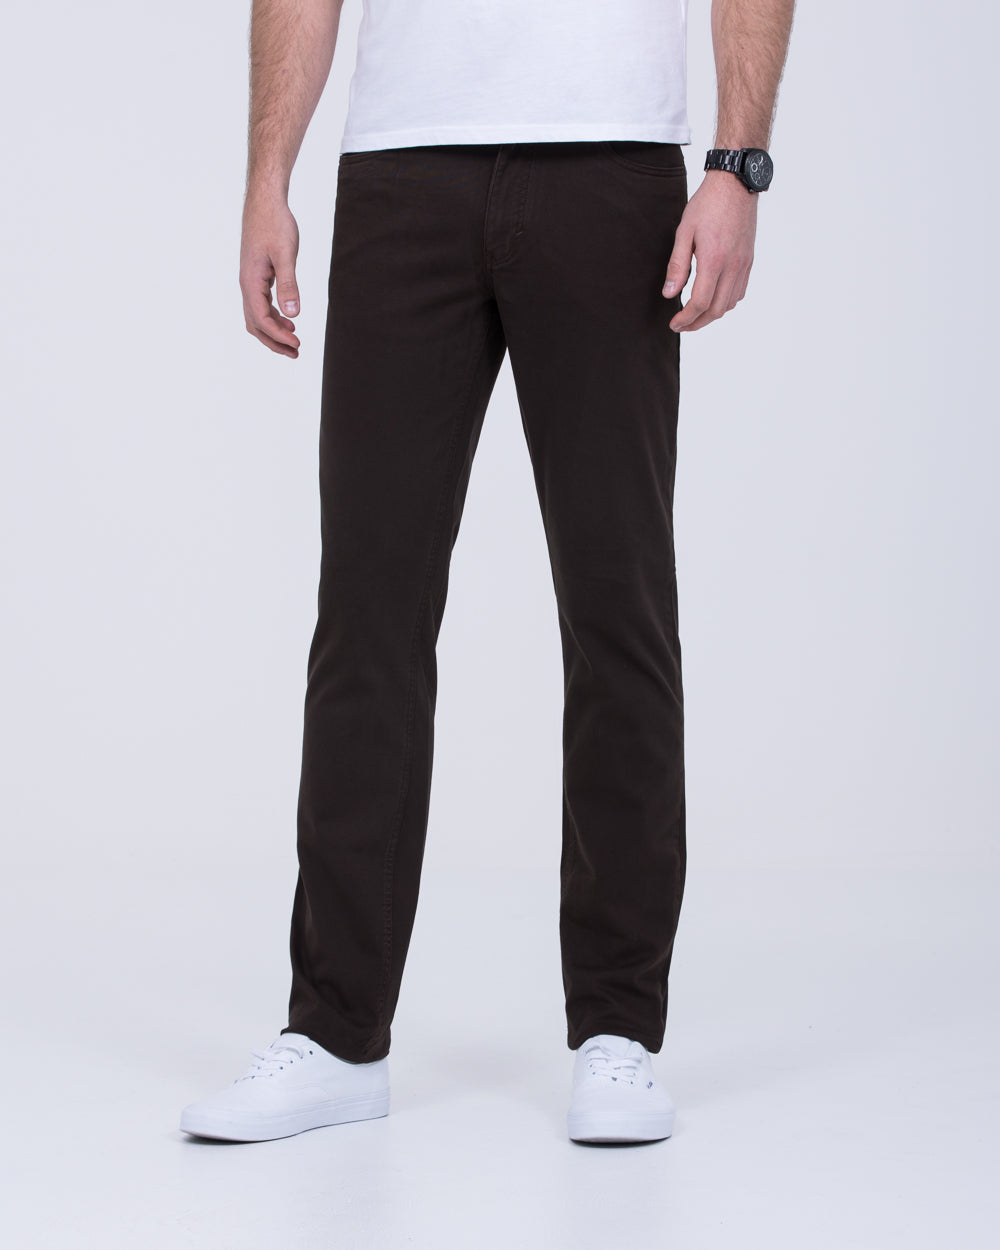 Redpoint Milton Slim Fit Tall Jeans (brown pattern)